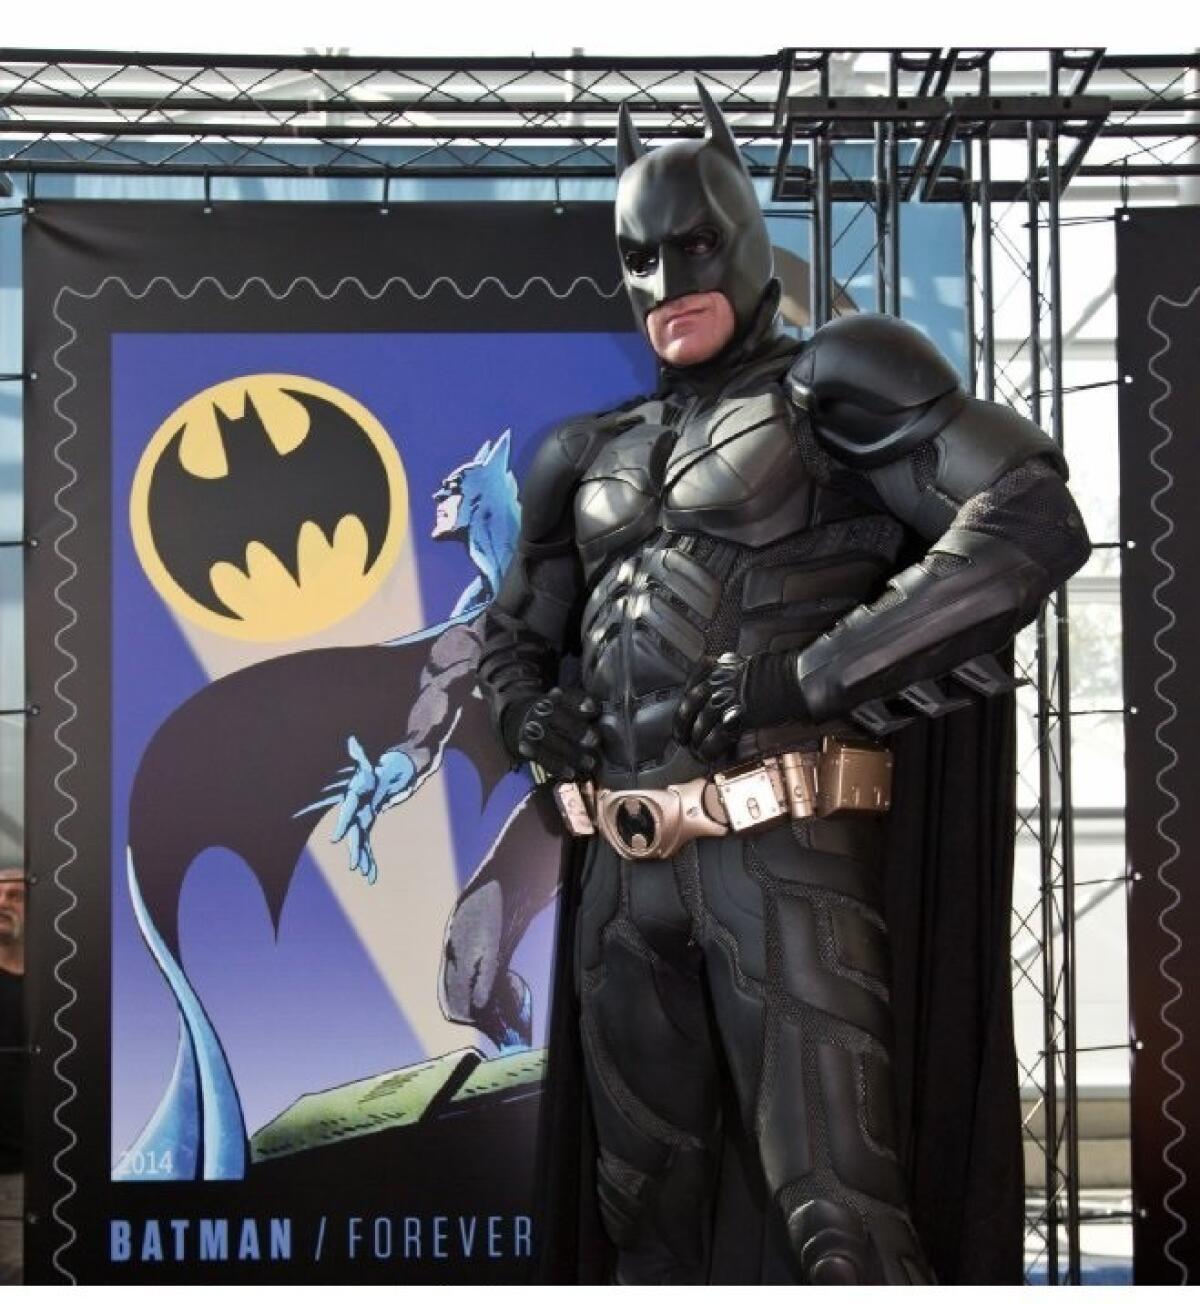 Batman swooped into New York Comic Con last month to unveil the Batman stamp series.